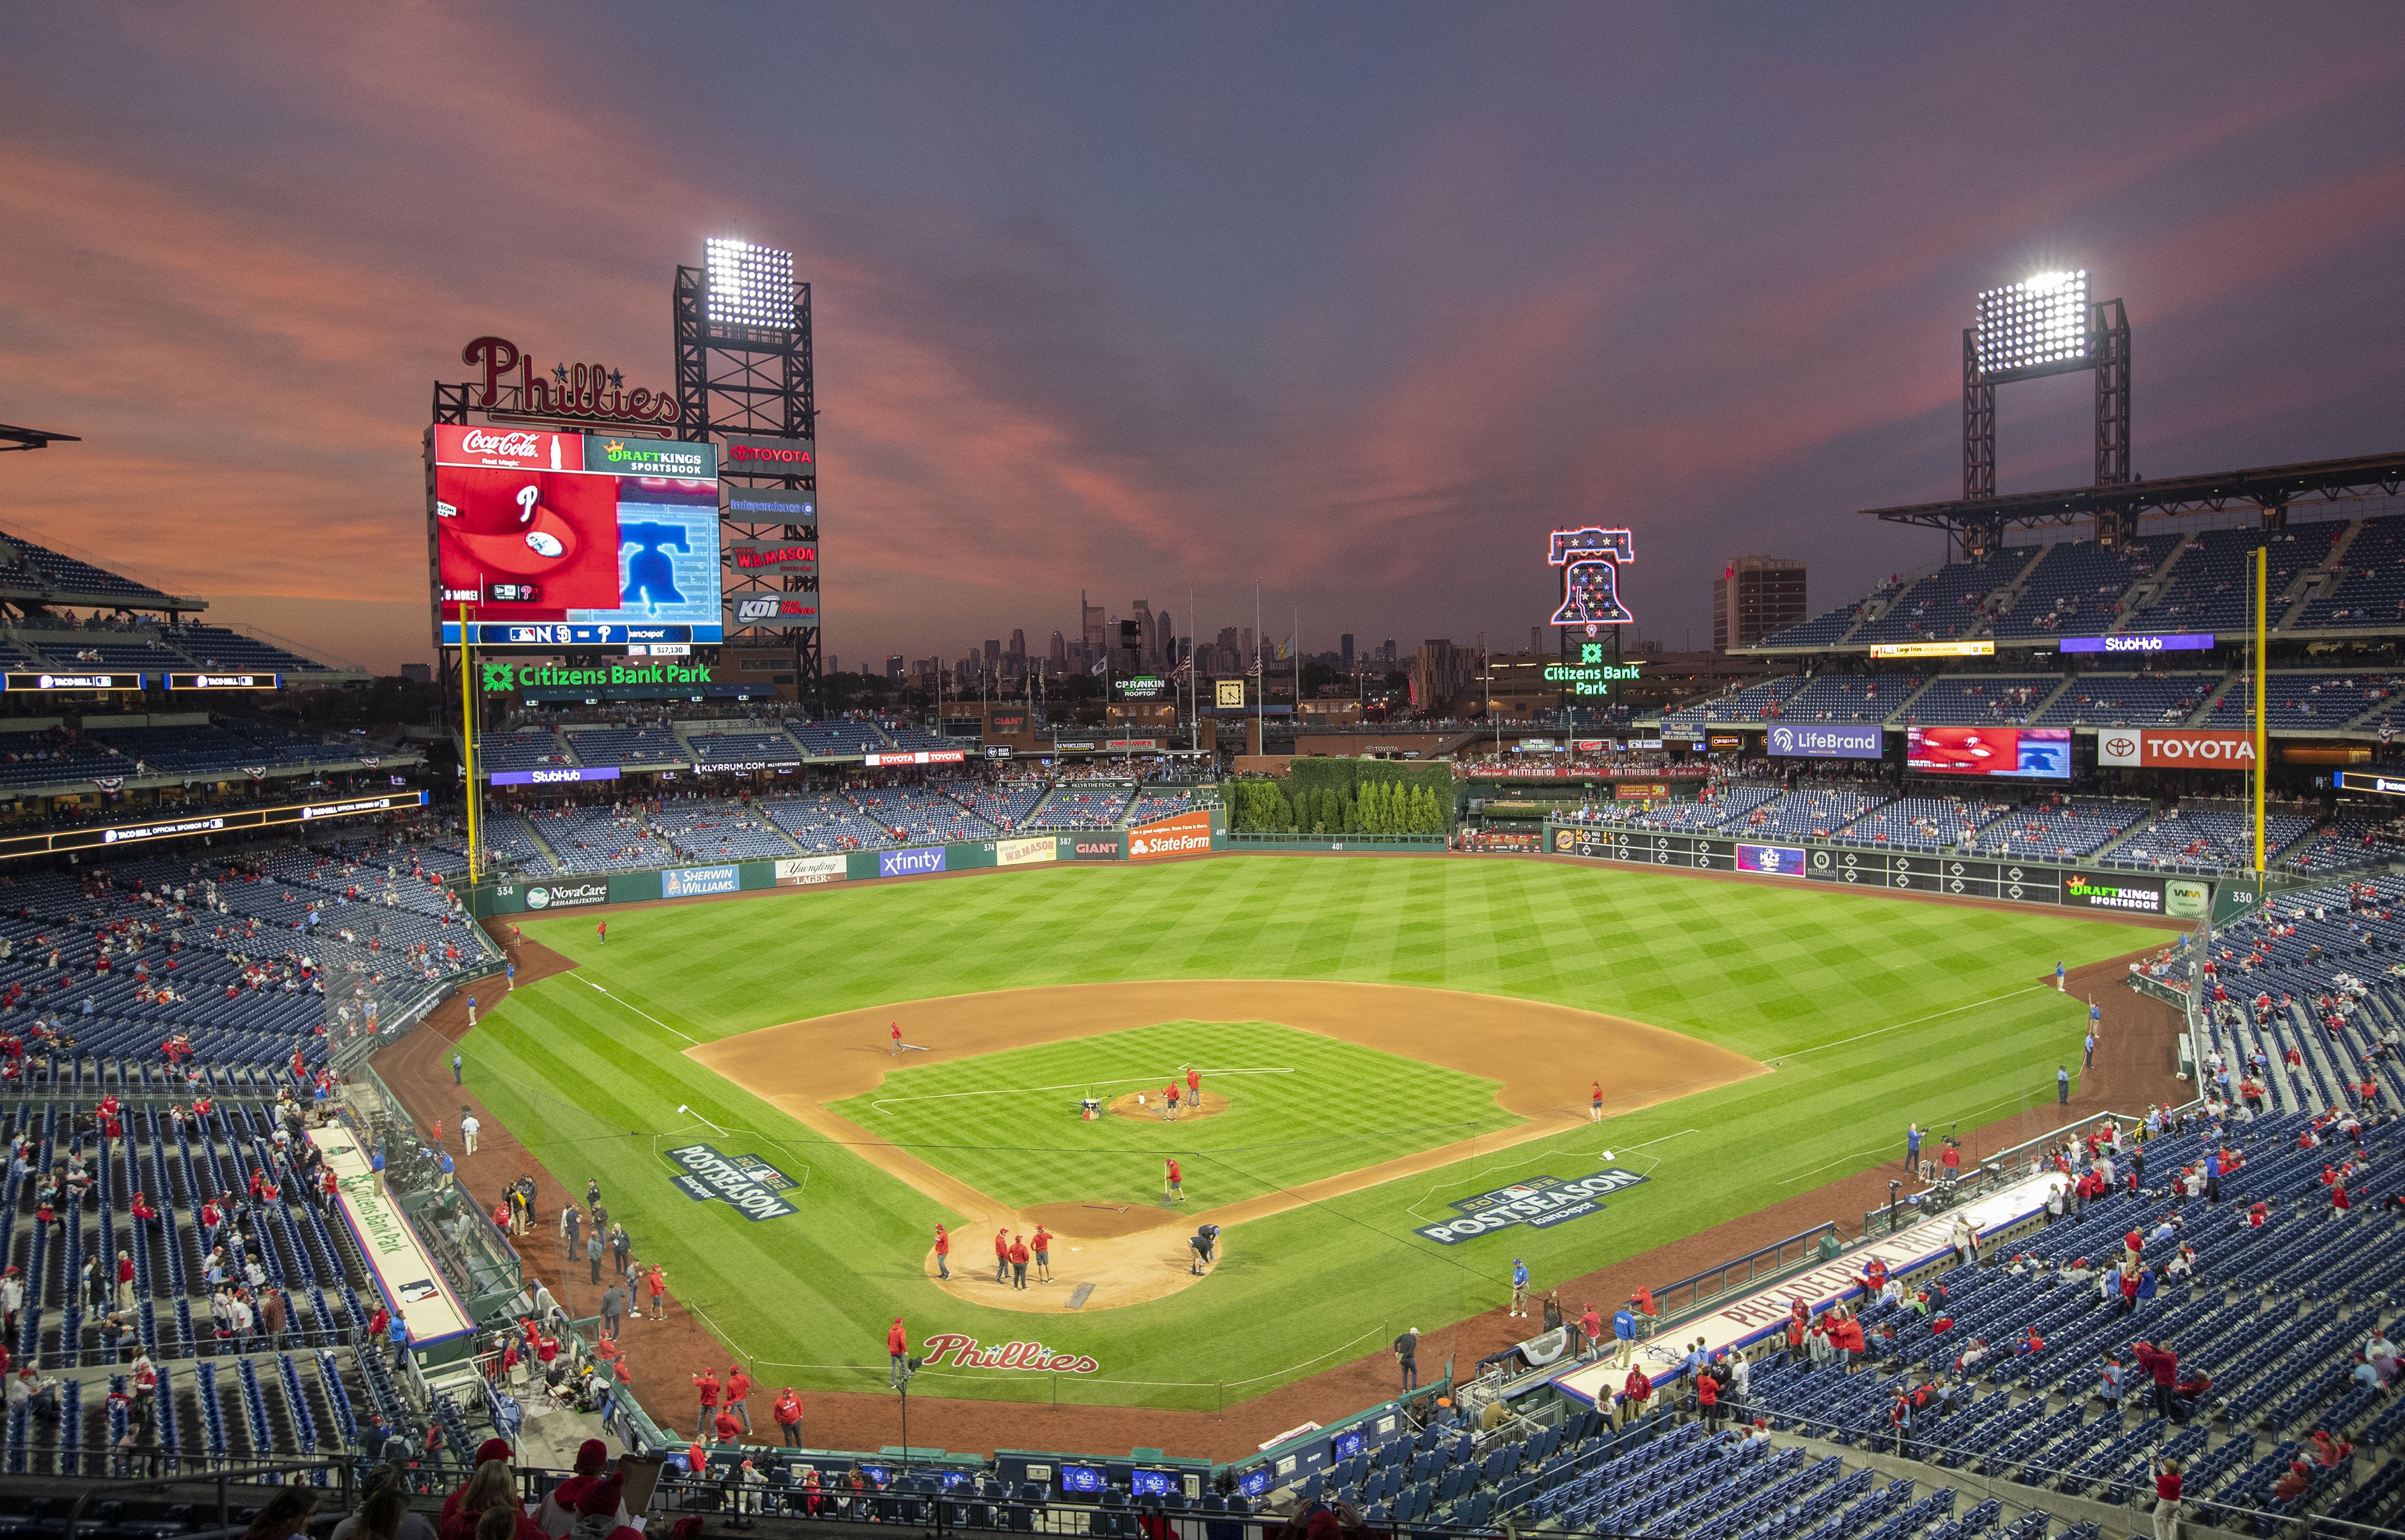 Phillies National League Champion Series Game 4 against San Diego at  Citizens Bank Park